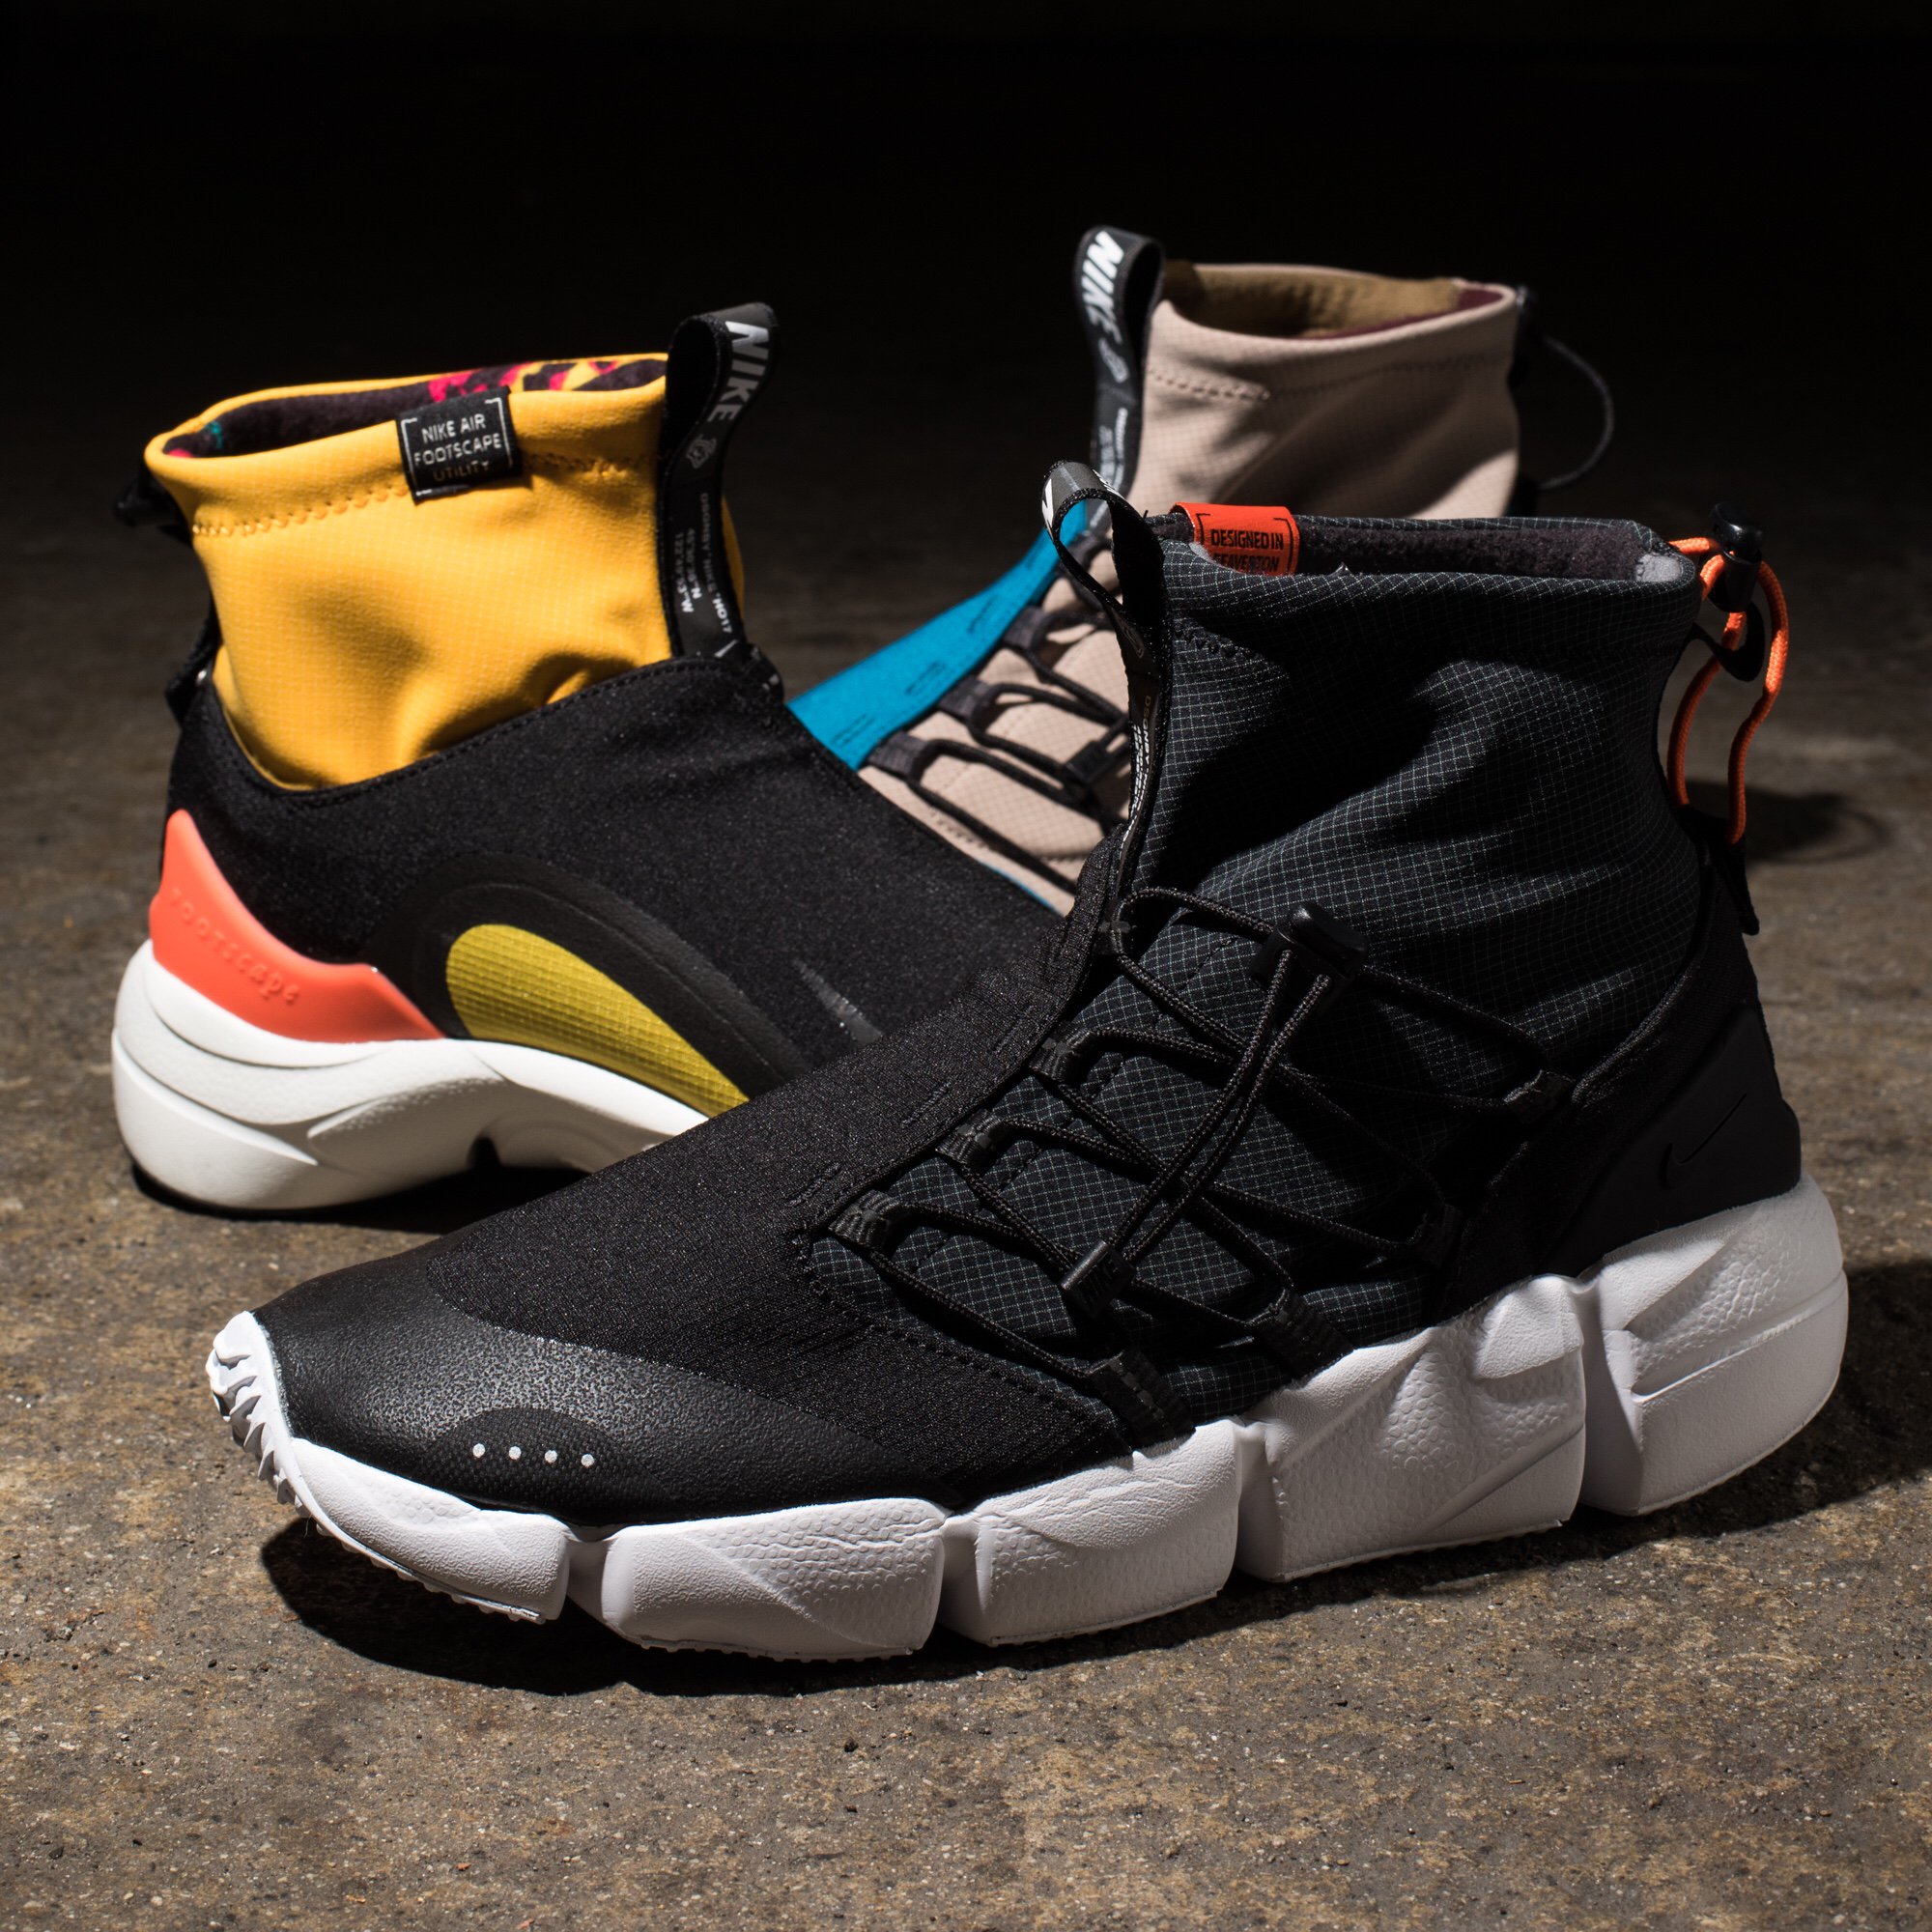 UNDEFEATED on Twitter: "Nike Air Footscape Mid Utility DM Available now at Select Undefeated Chapter Stores and https://t.co/rPhV7ZxrNE / Twitter